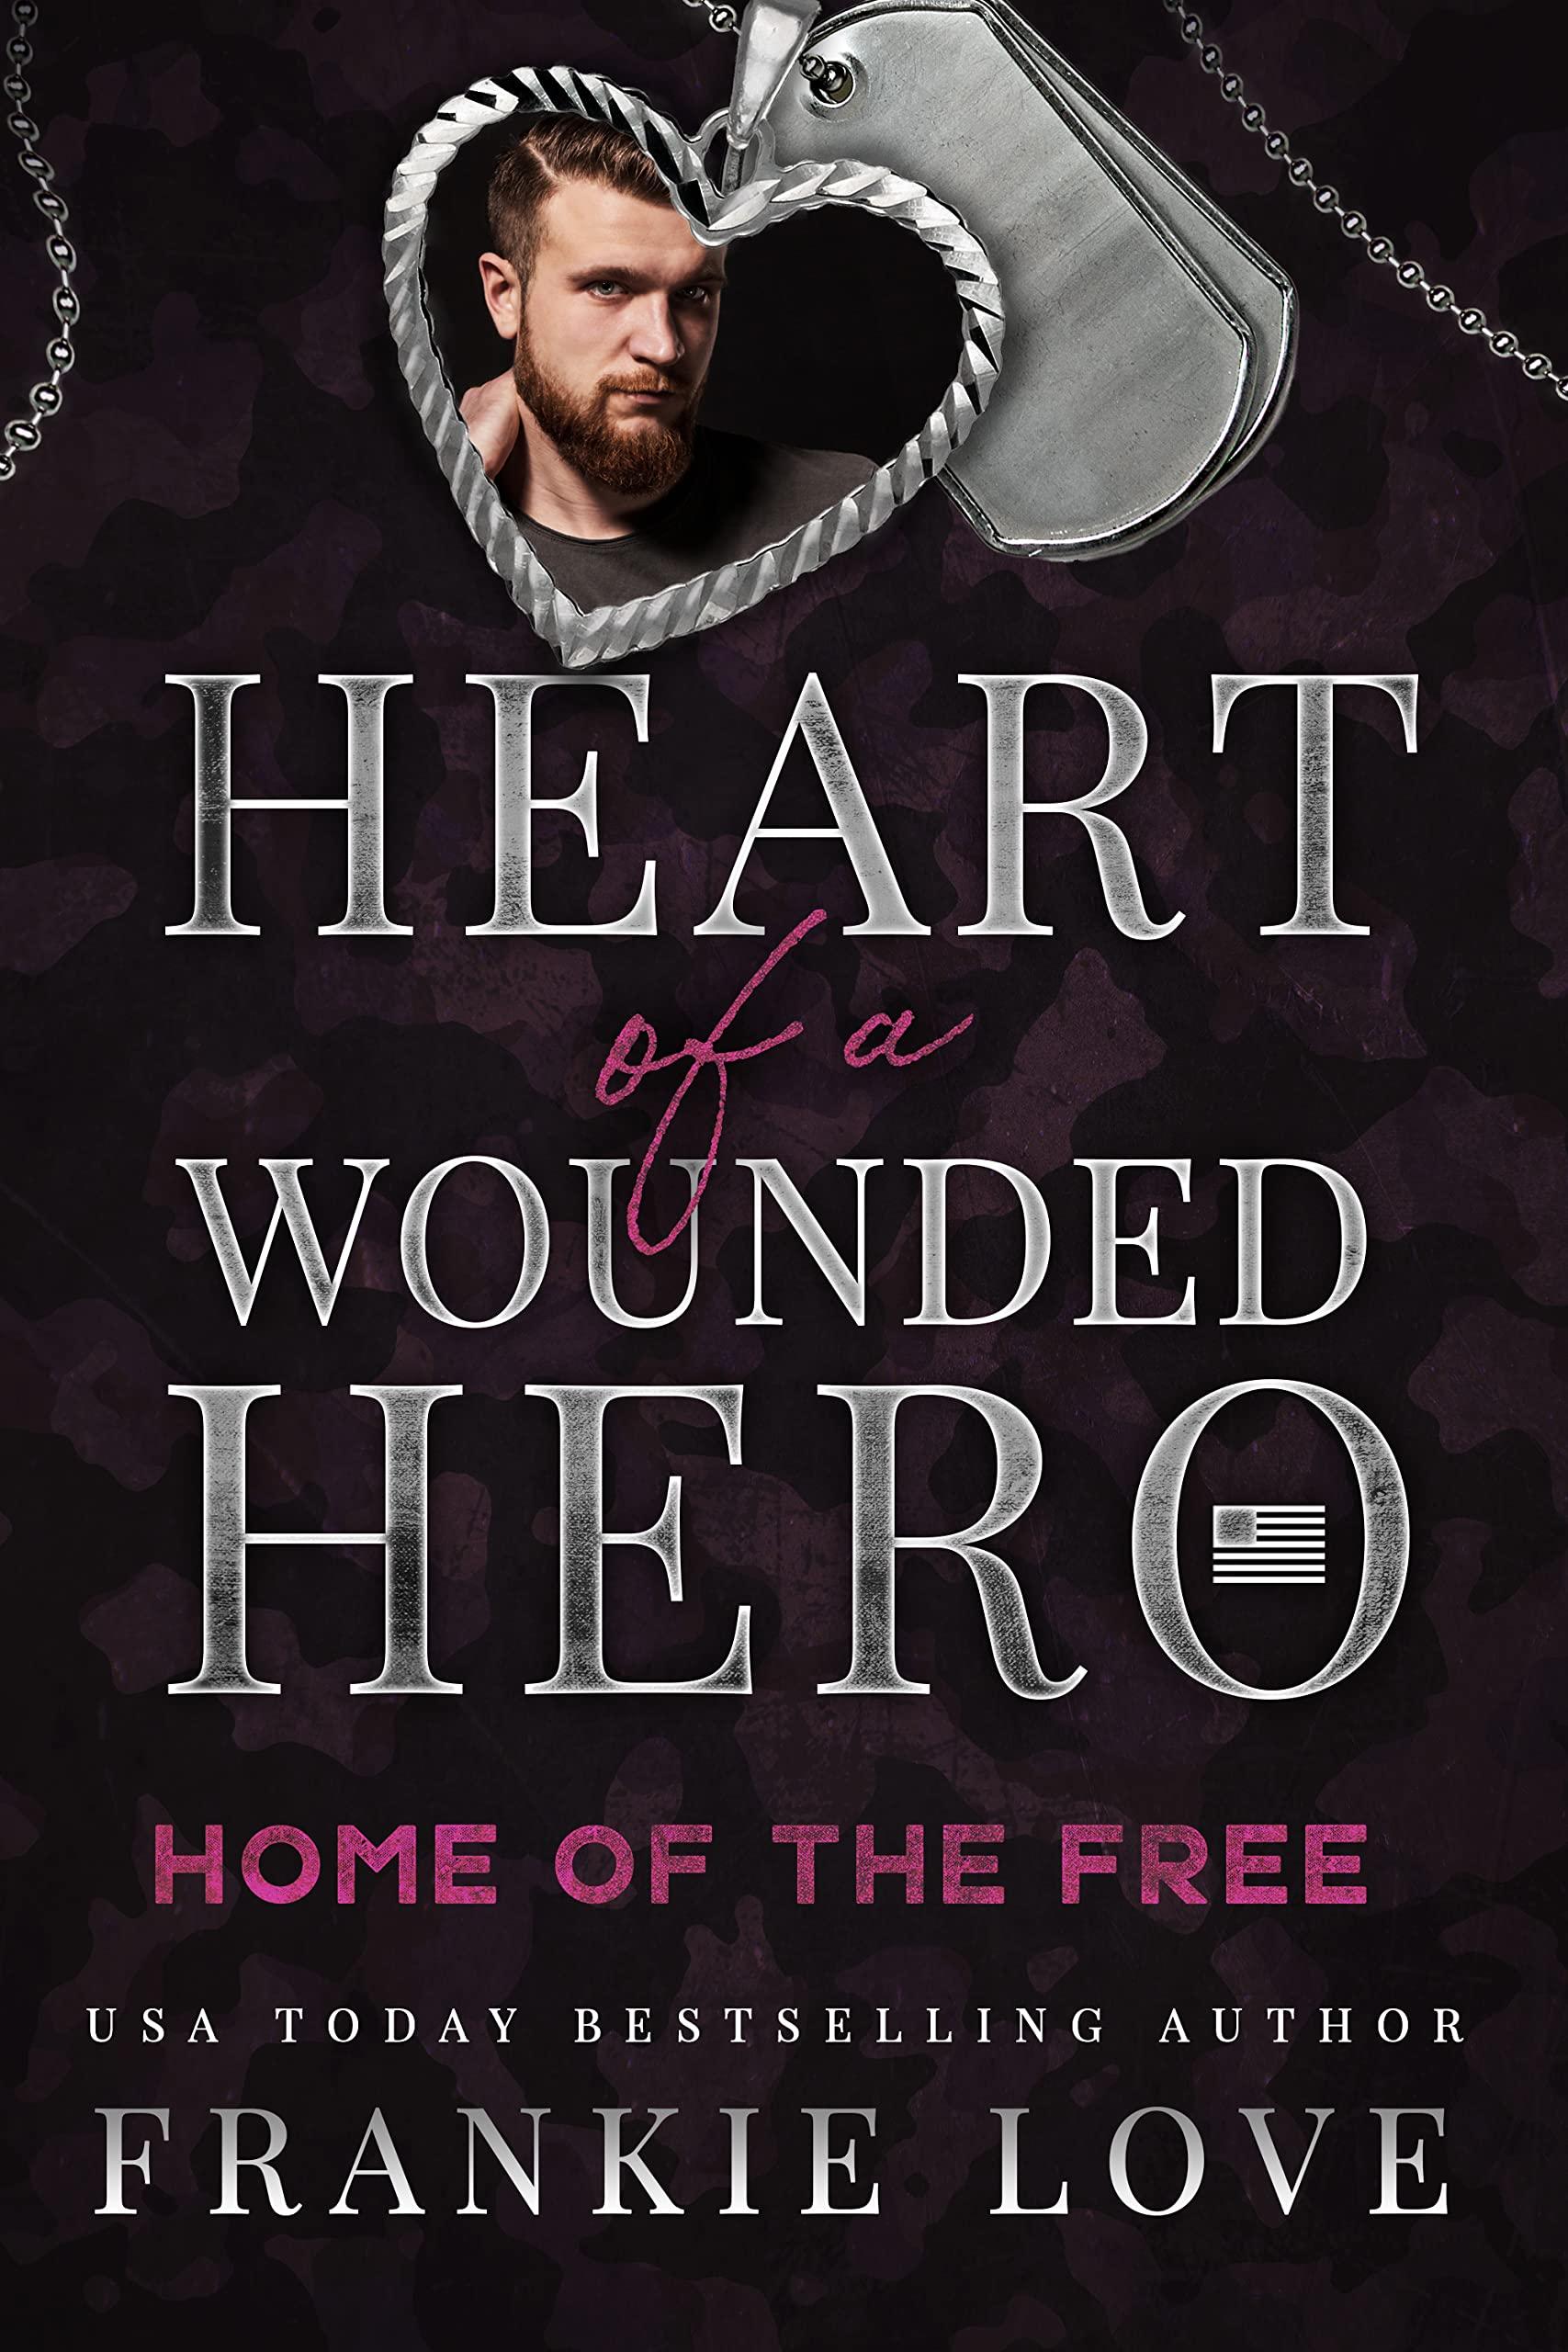 Home of the Free: Heart of a Wounded Hero